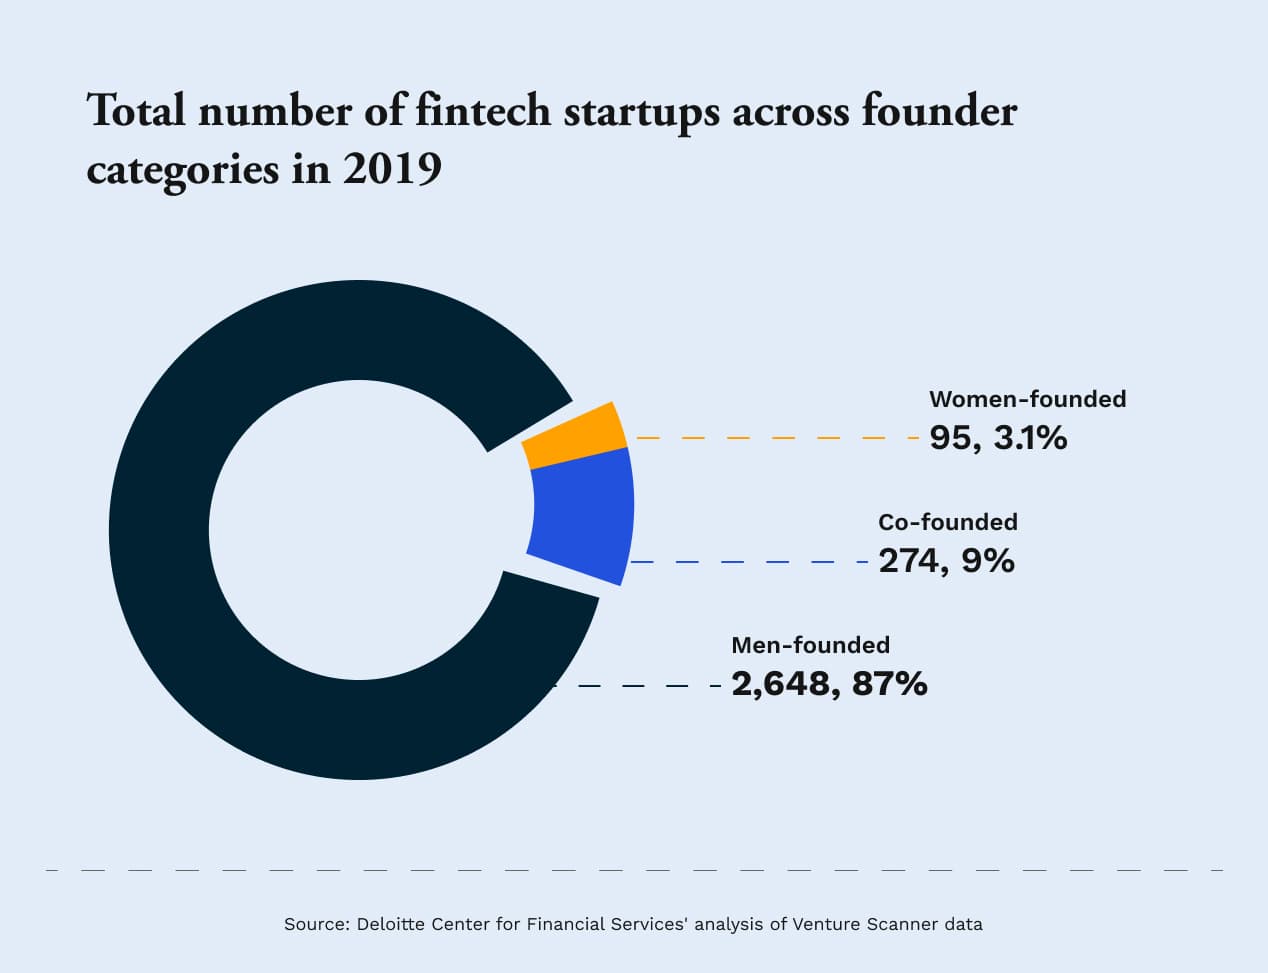 Circle chart showing the total number of fintech startups across founder categories in 2019